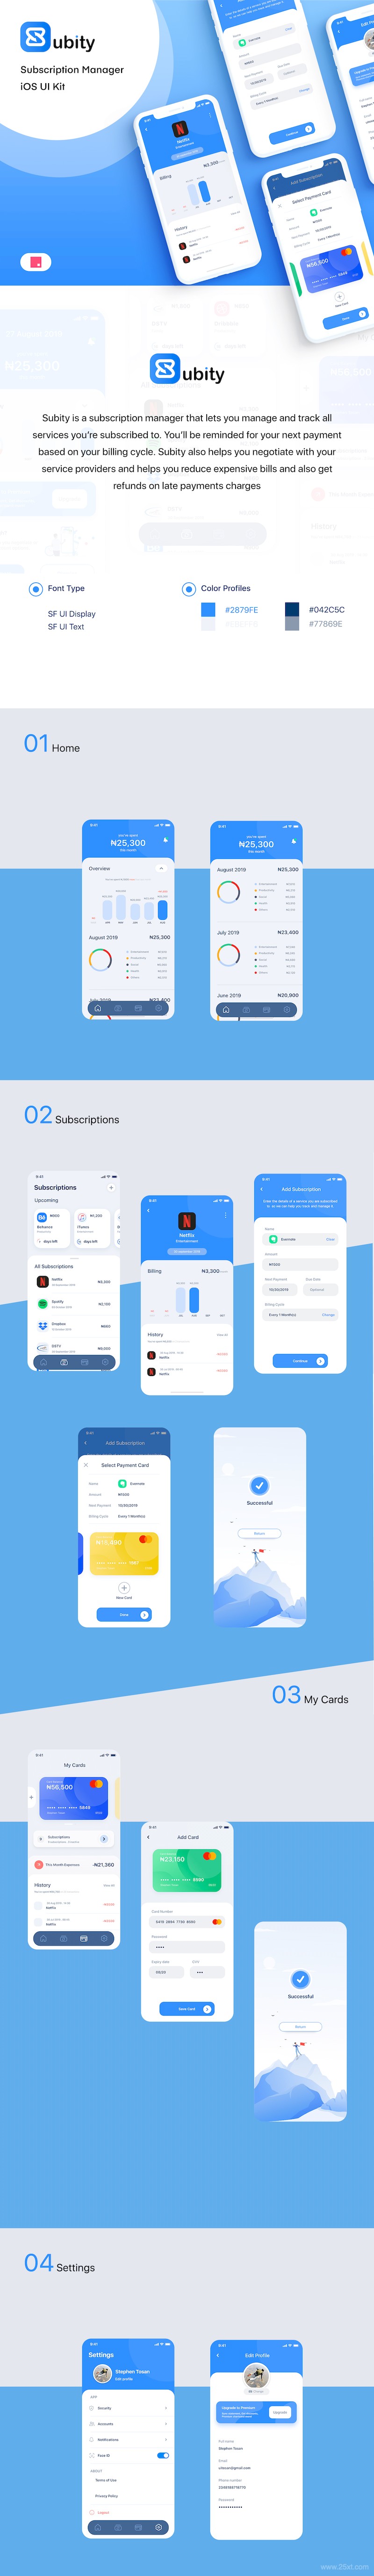 Subity-Subscription-Manager-For-Invision-Studio的副本.jpg